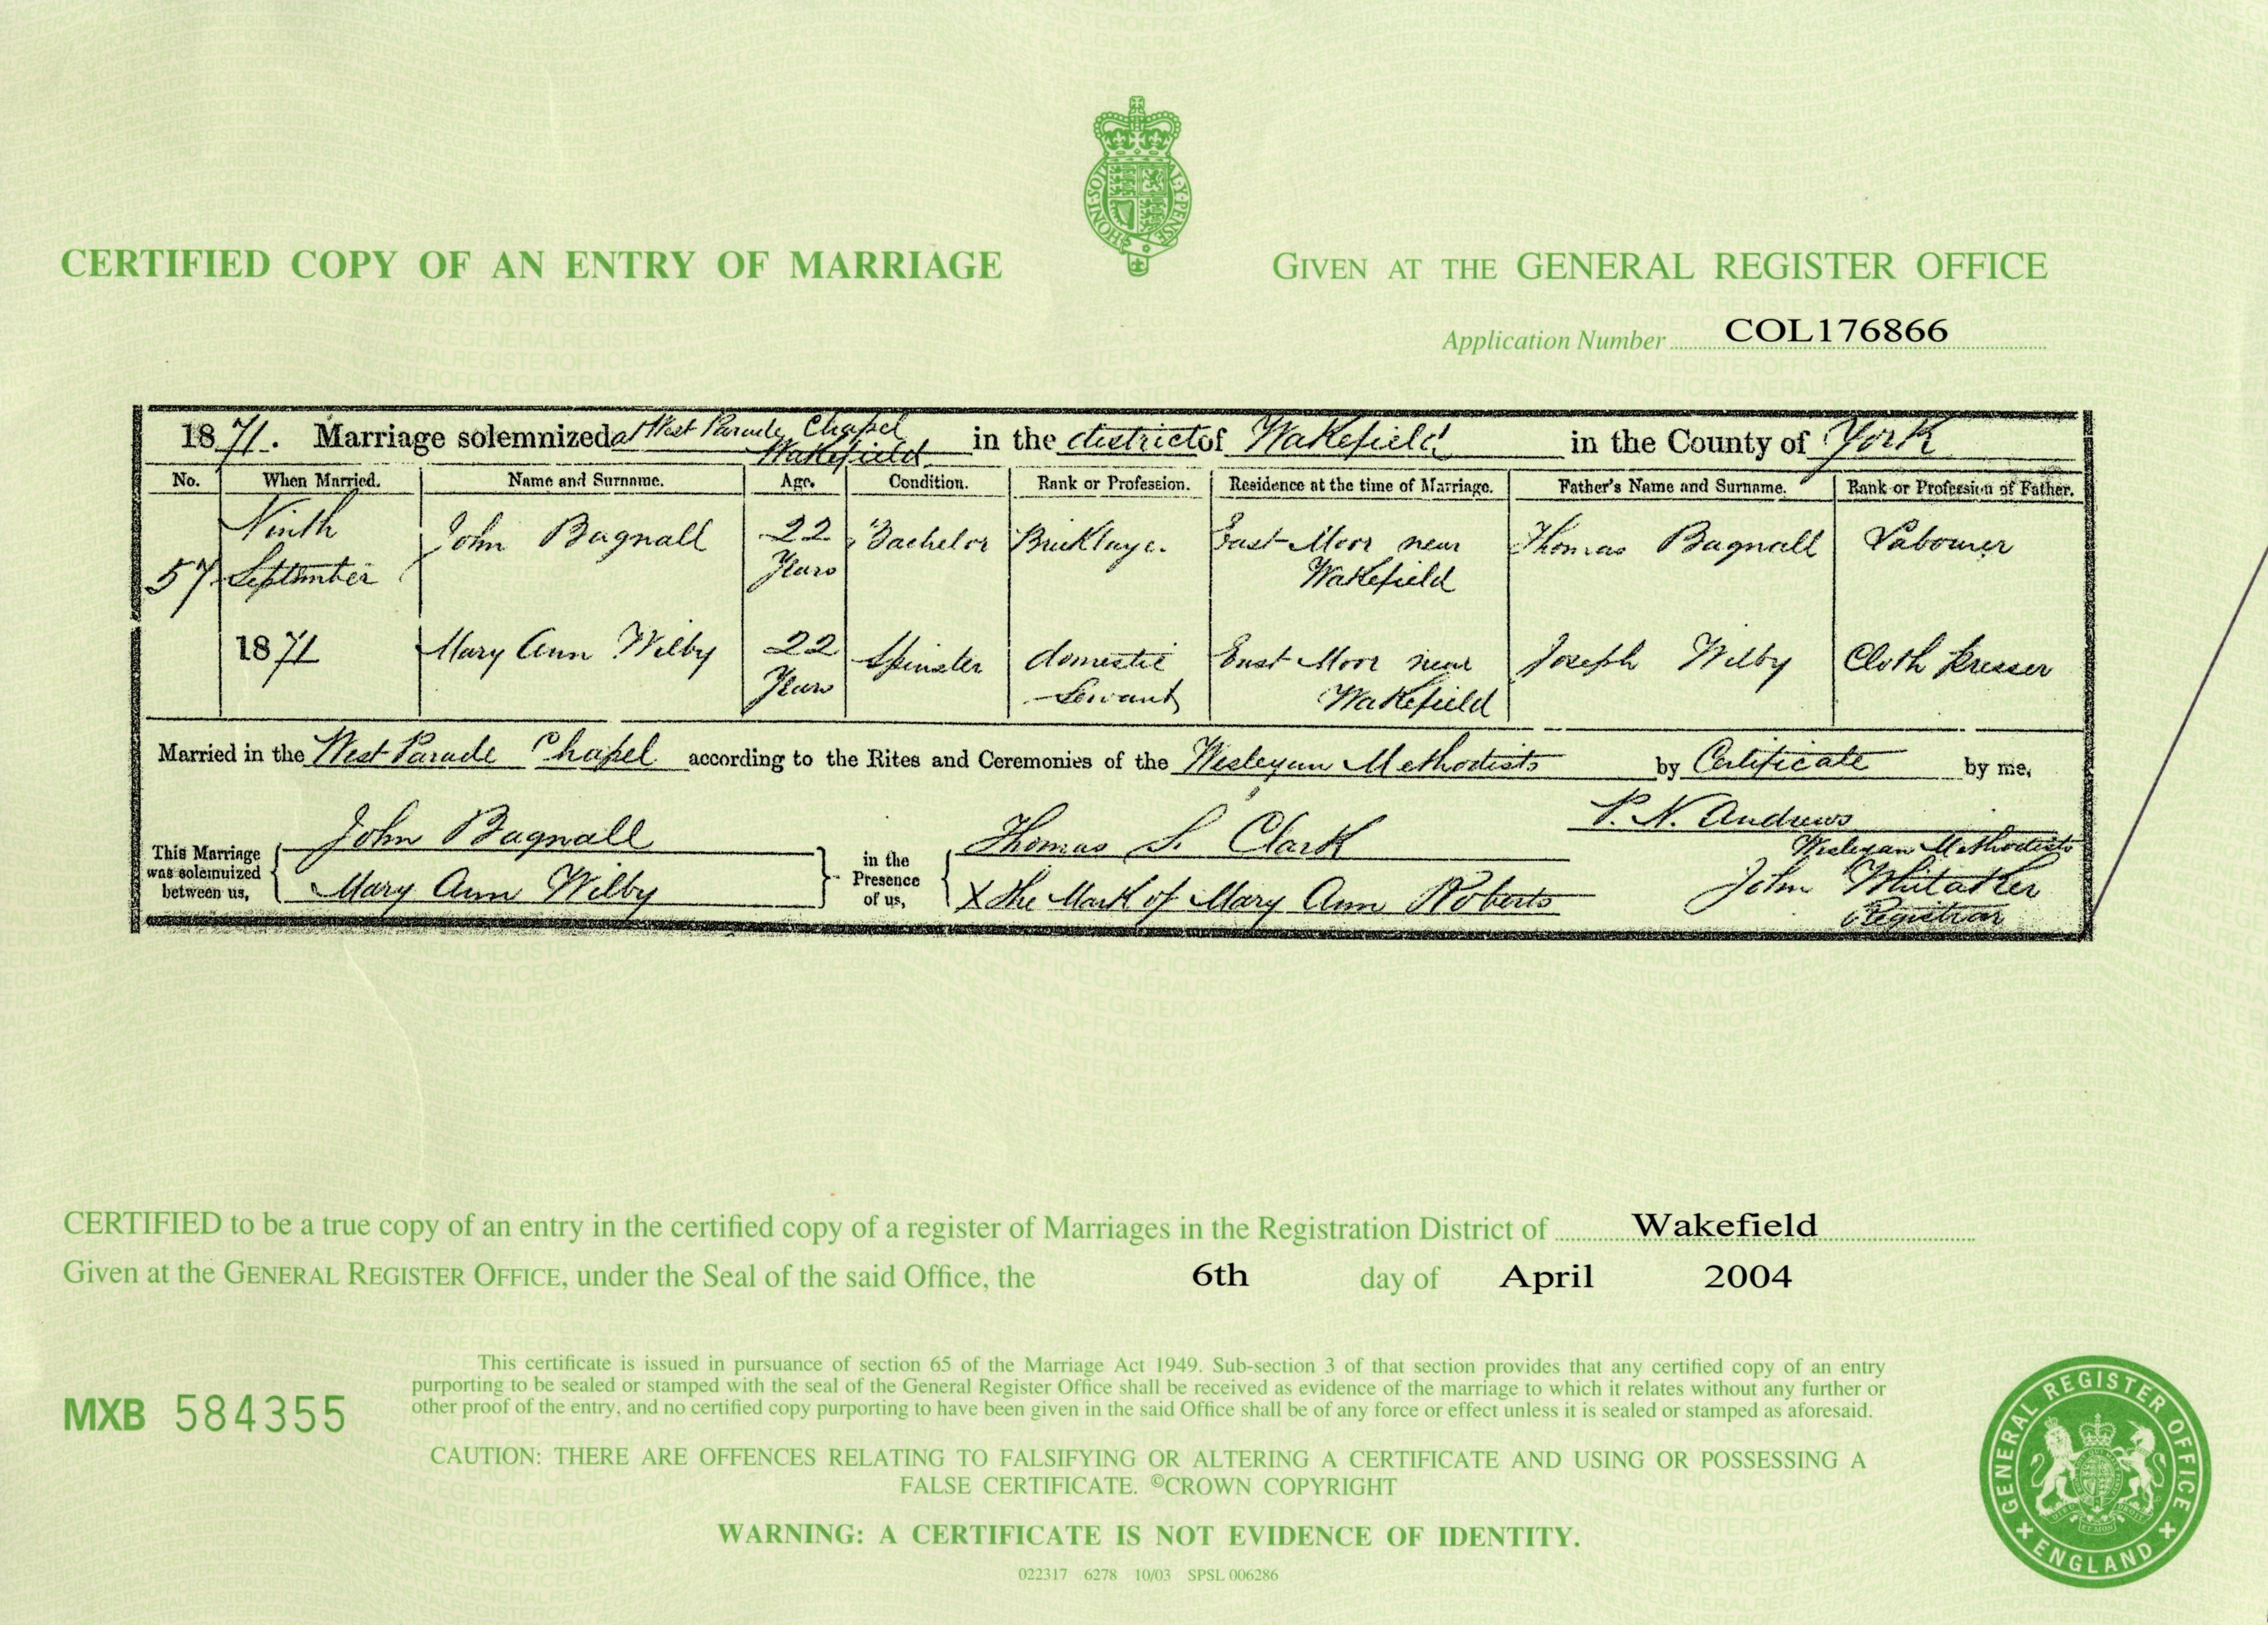 John and Mary Ann's Marriage Certificate